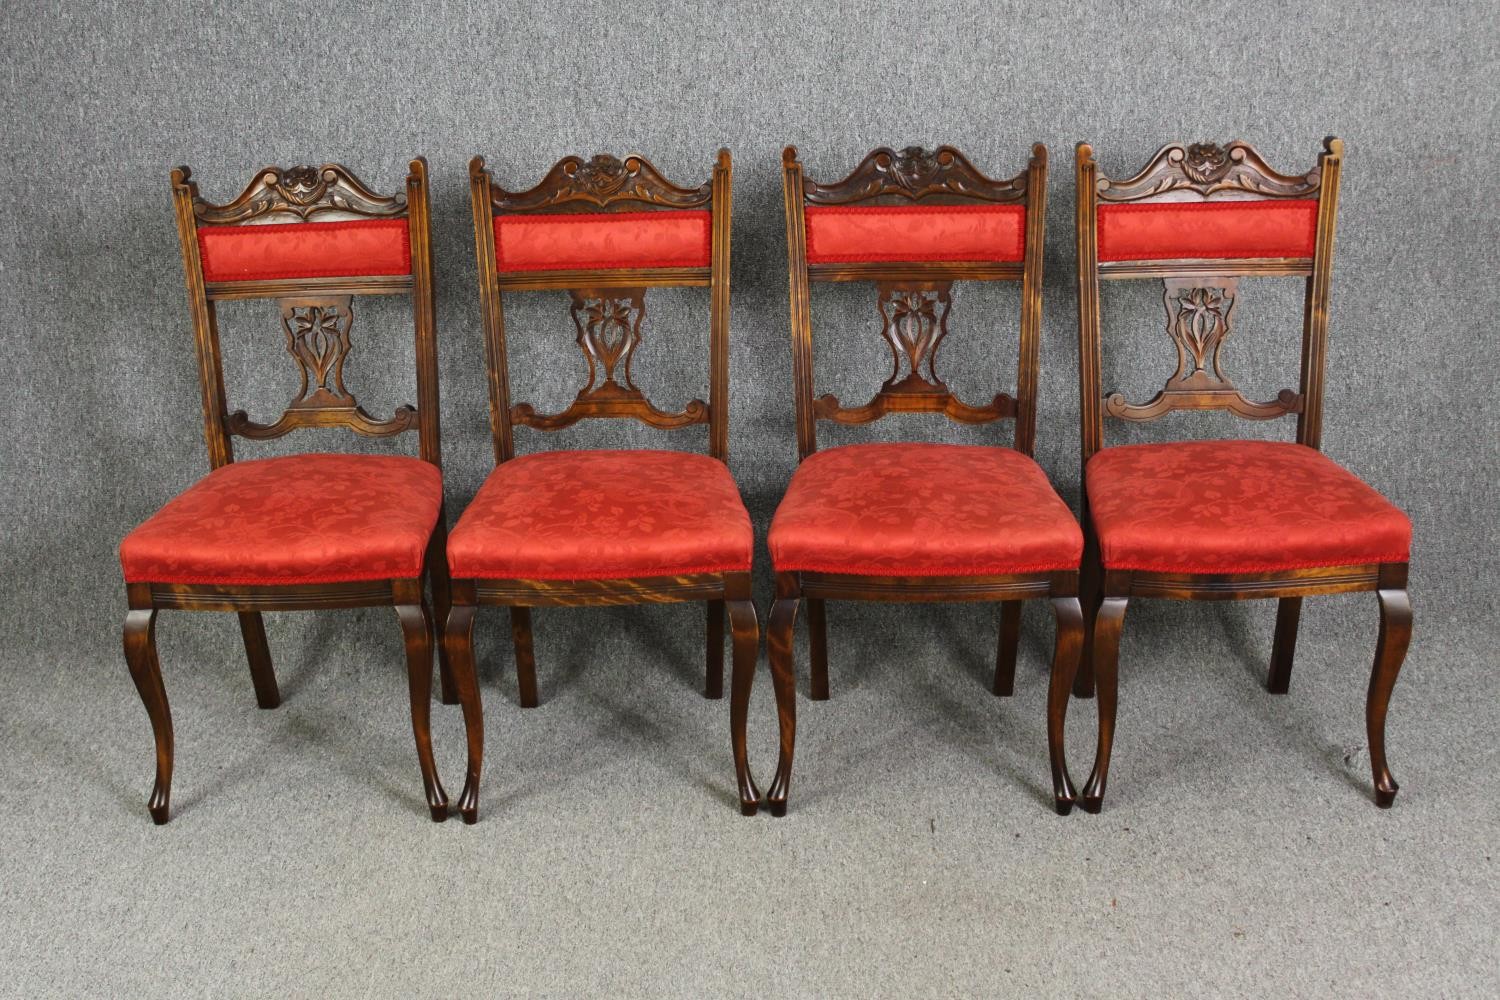 A set of four late Victorian walnut salon chairs in red damask upholstery